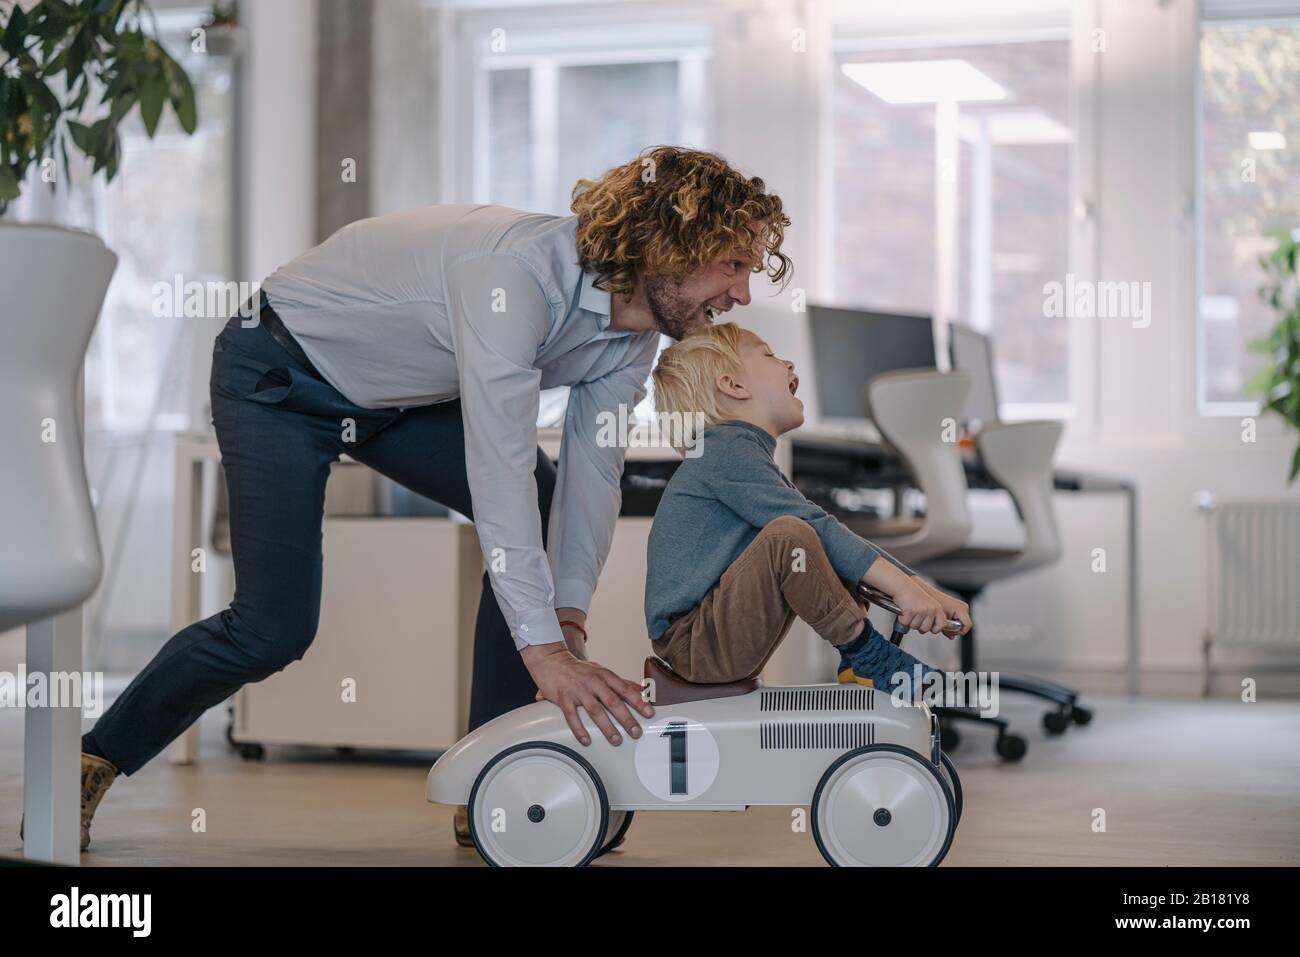 Businessman pushing son on toy car in office Stock Photo